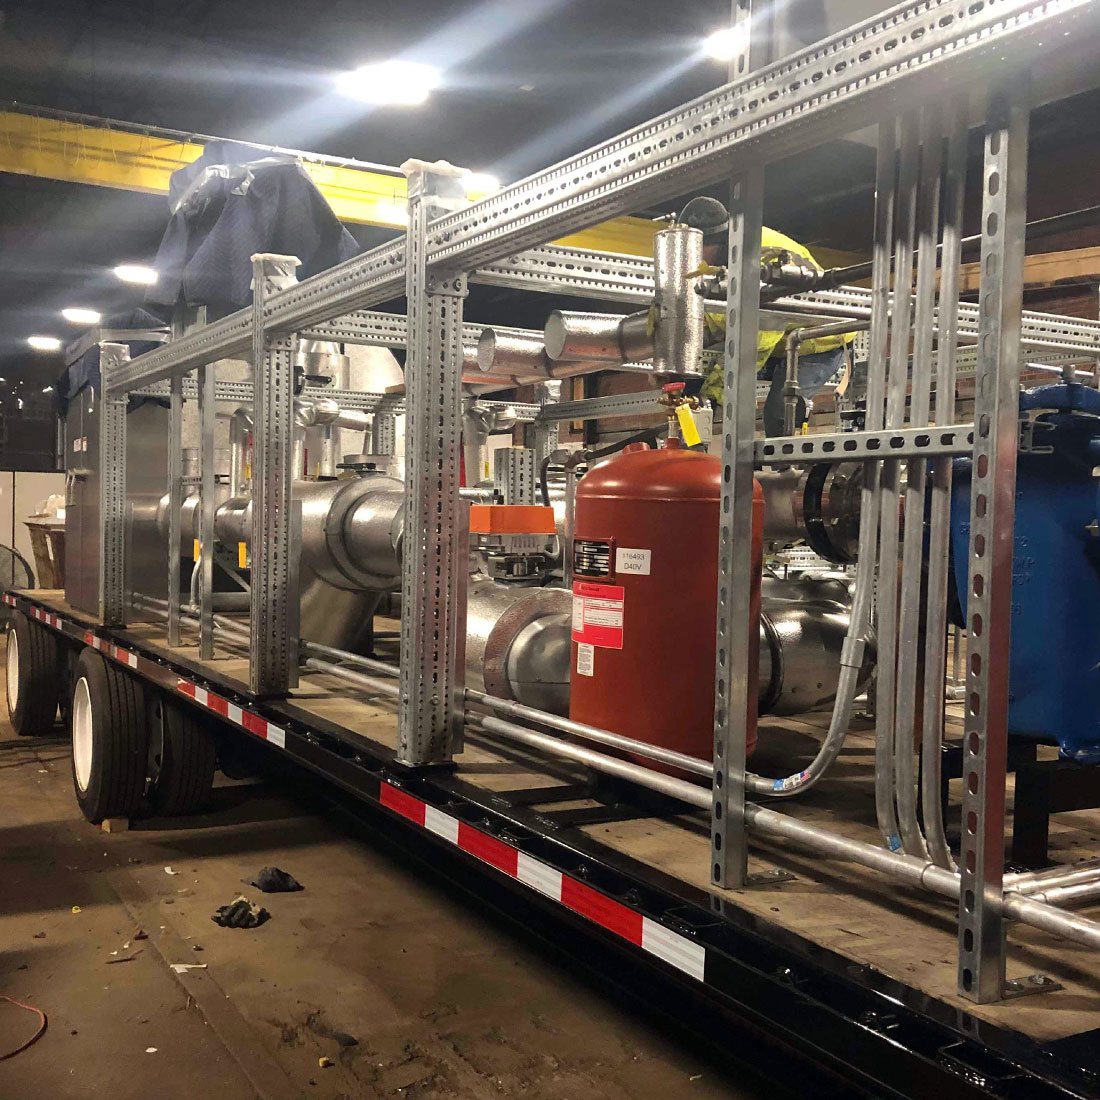 Sikla Equipment Skid design engineered for a local area mechanical and electrical contractor in Buffalo, NY by Unistrut Construction | Unistrut Buffalo Supports